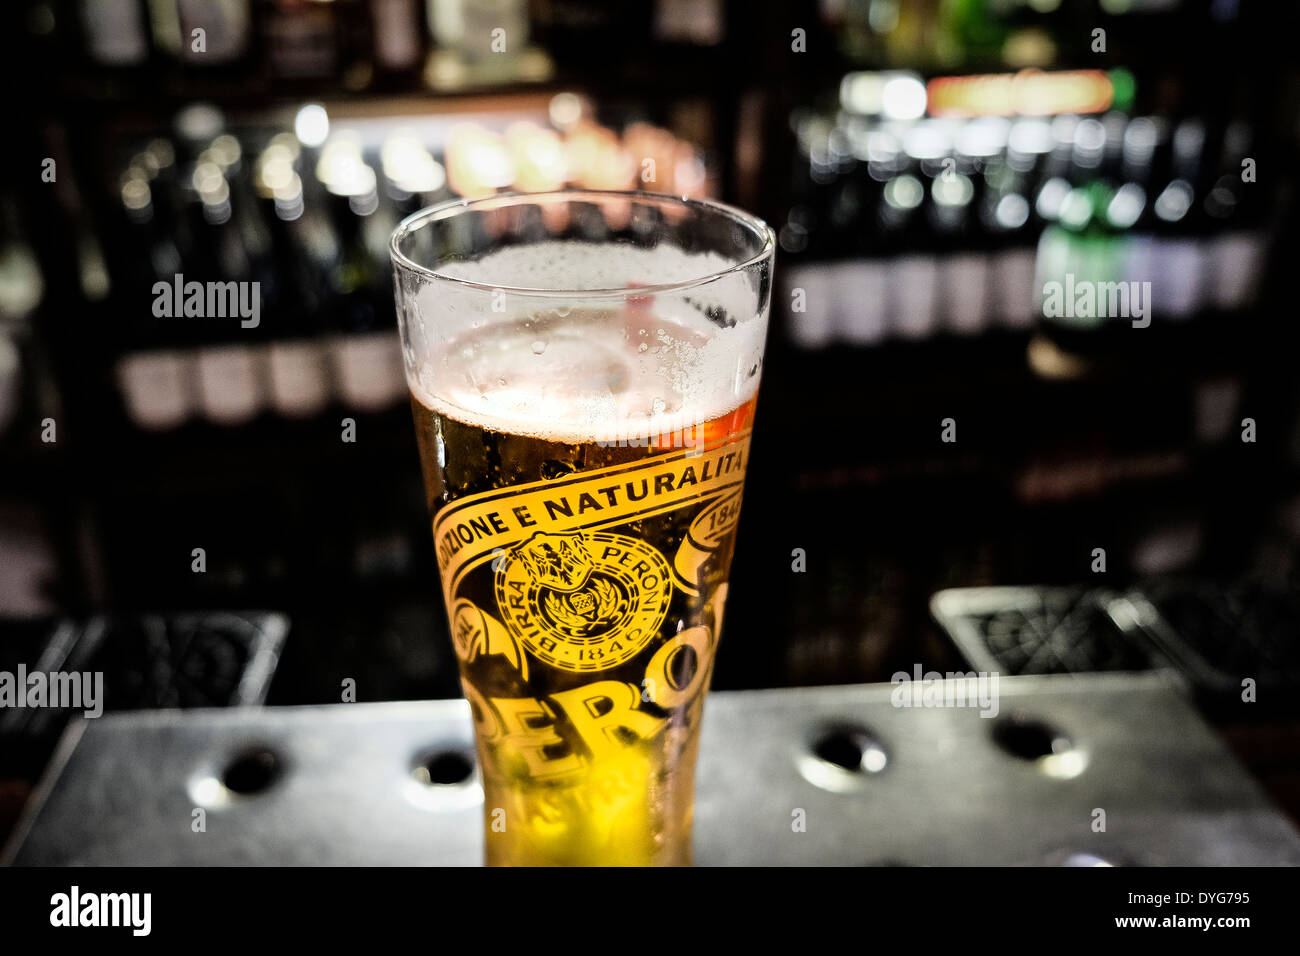 https://c8.alamy.com/comp/DYG795/a-partially-consumed-pint-of-peroni-beer-on-a-bar-in-a-pub-DYG795.jpg